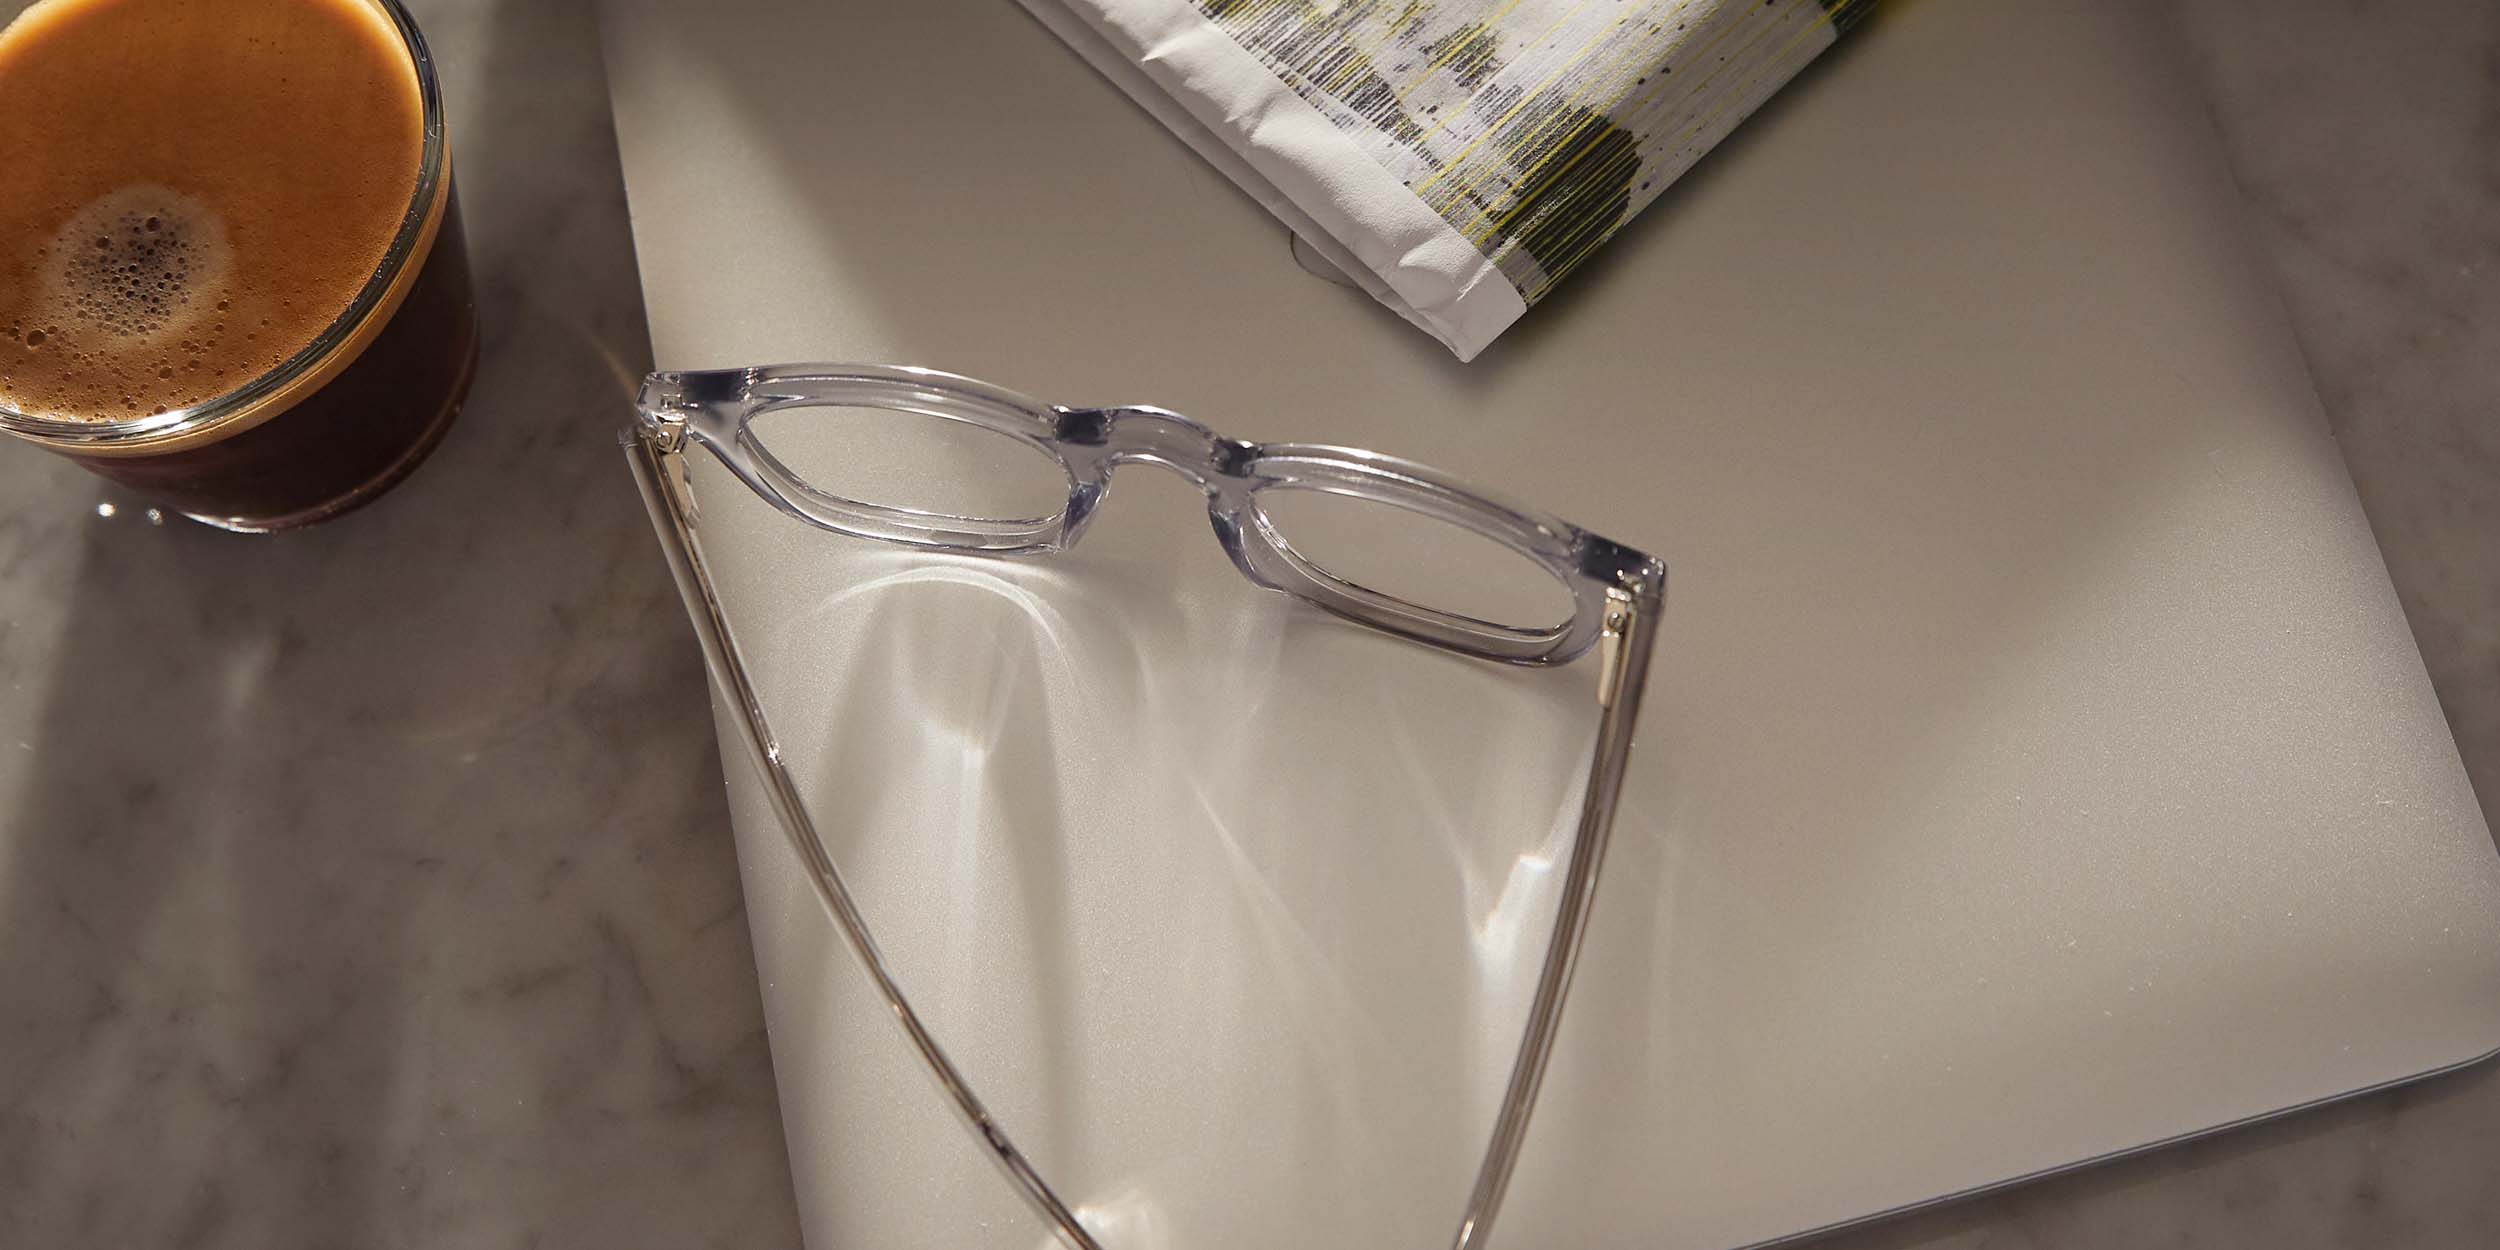 Photo Details of Thomas Dark Tortoise Reading Glasses in a room